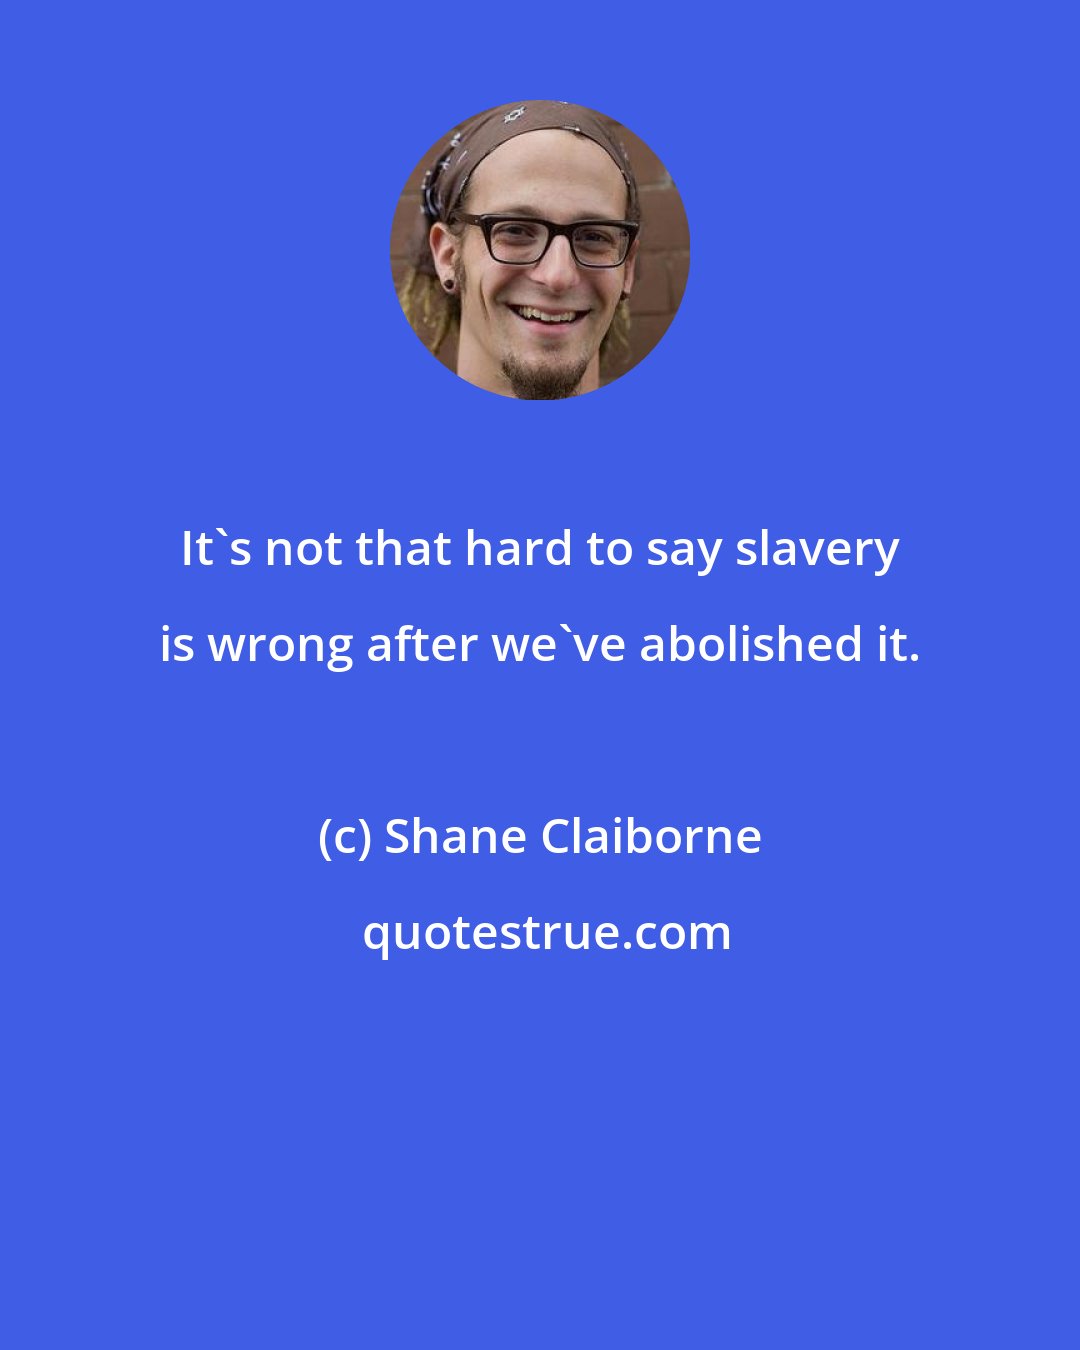 Shane Claiborne: It's not that hard to say slavery is wrong after we've abolished it.